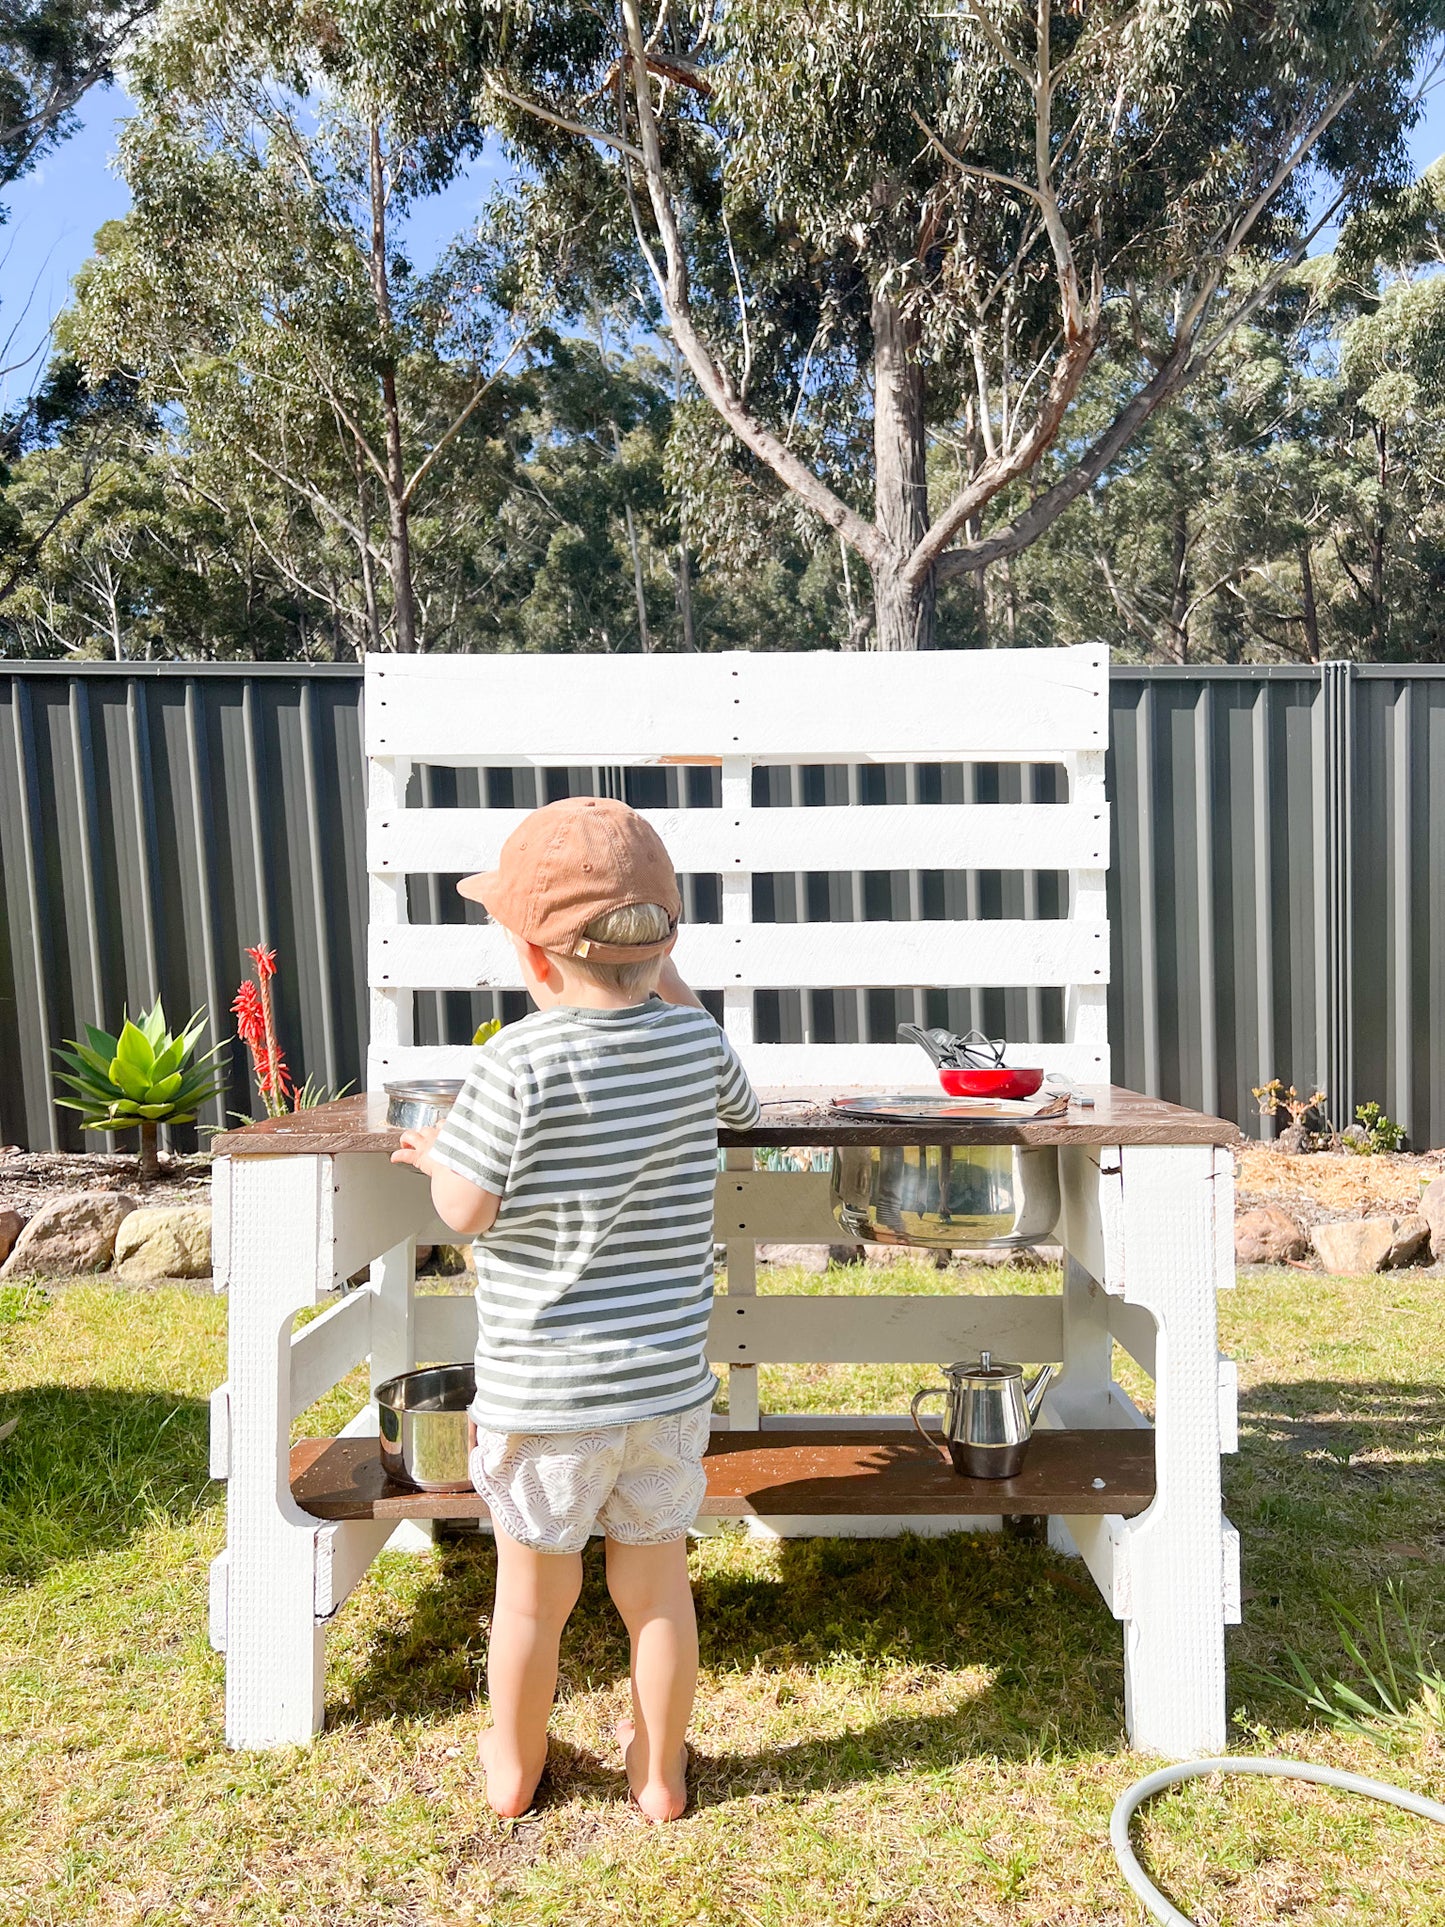 How to Build a Kids Mud Kitchen Guide